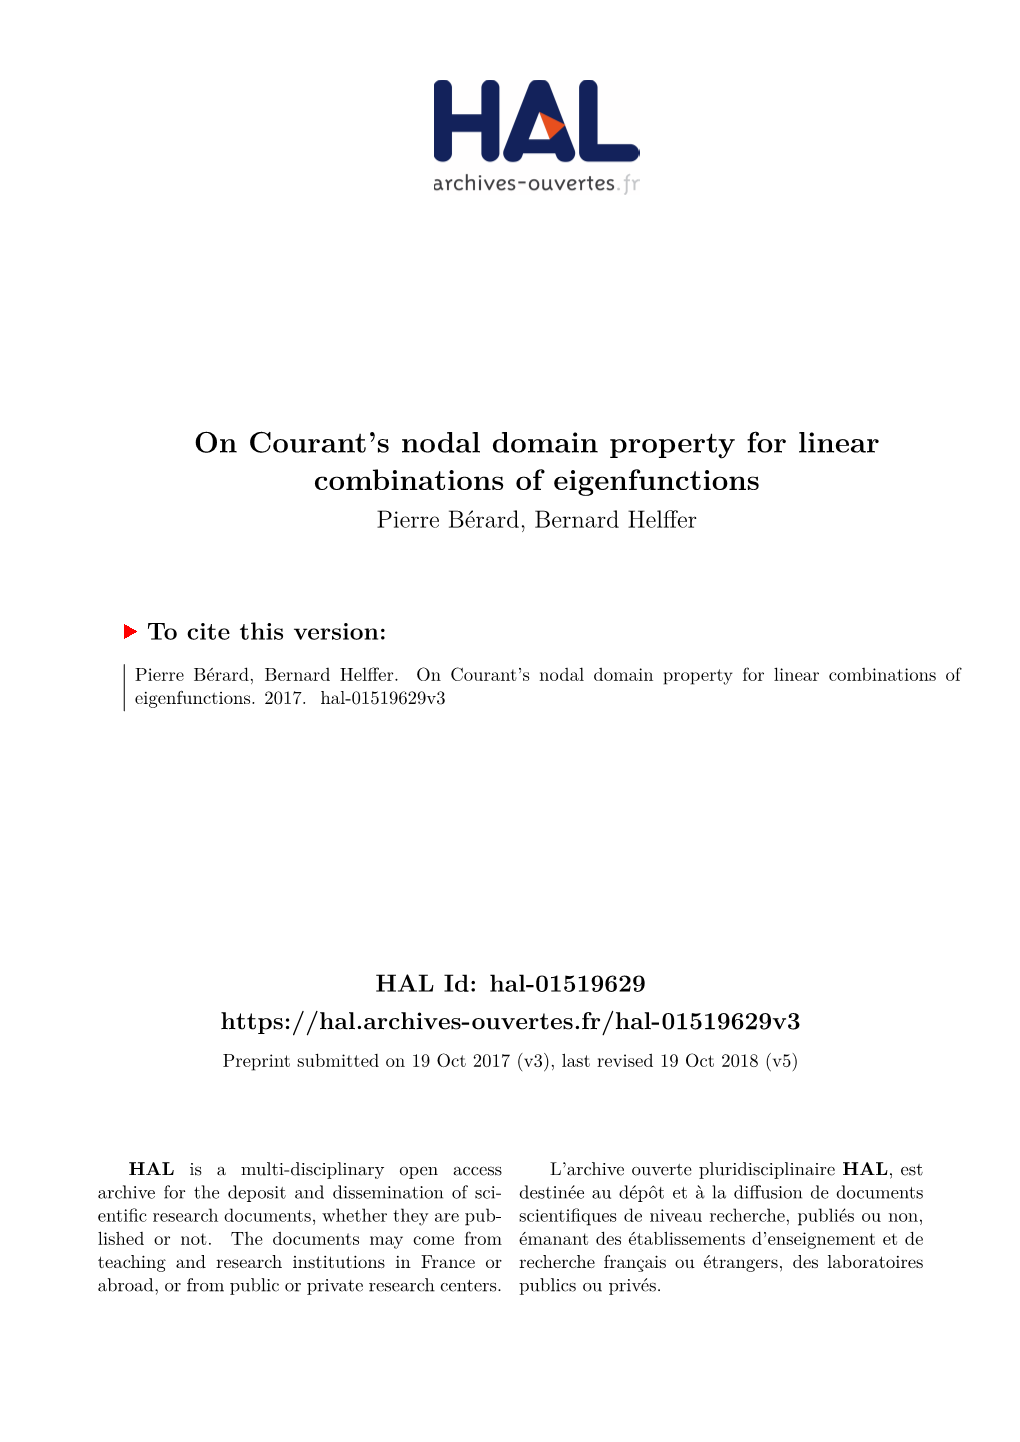 On Courant's Nodal Domain Property for Linear Combinations Of